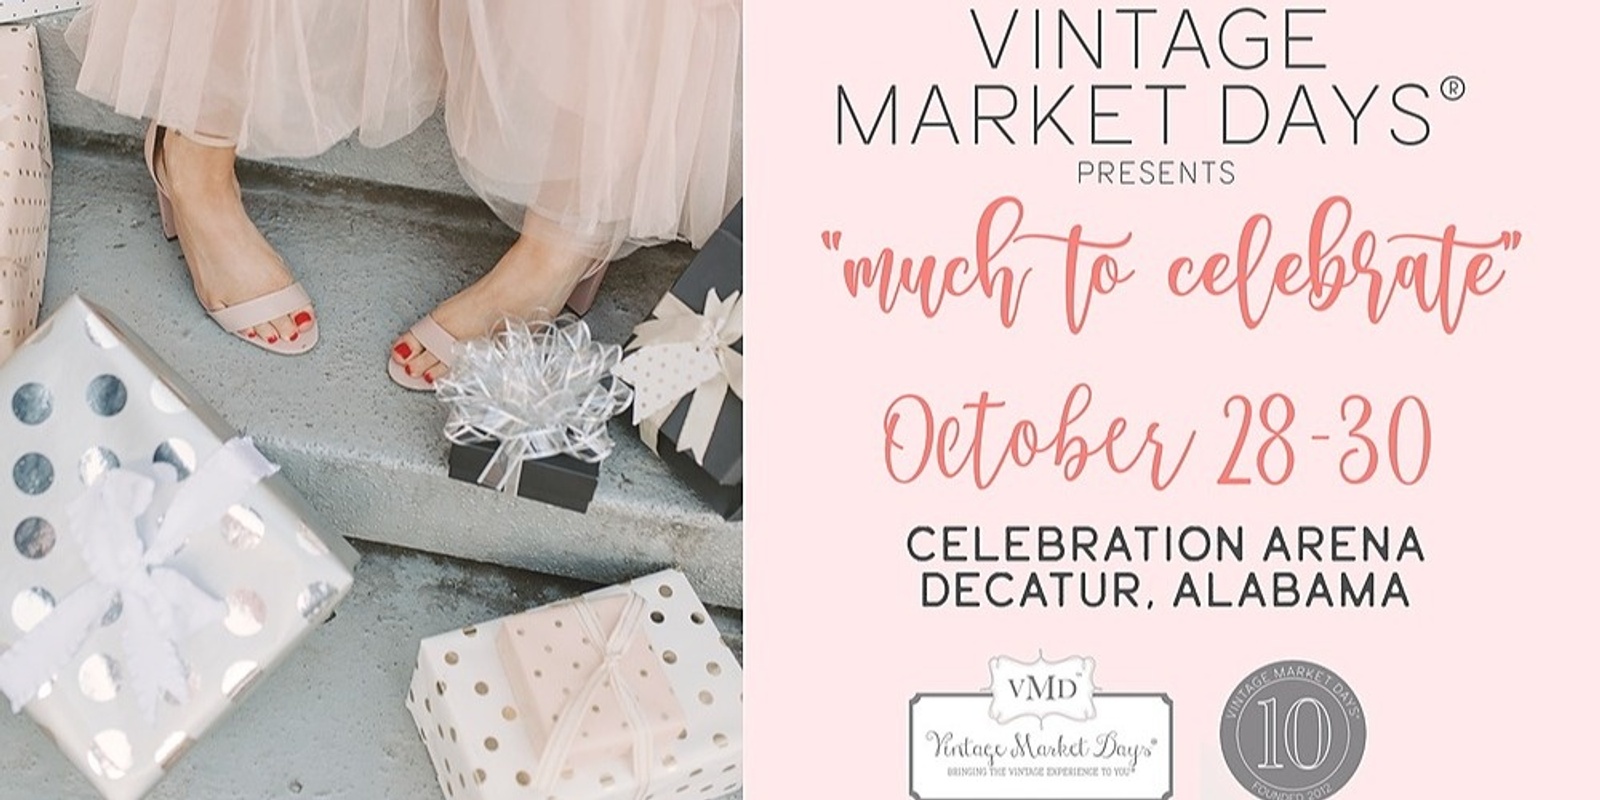 Banner image for Vintage Market Days of North Alabama presents "MUCH TO CELEBRATE"